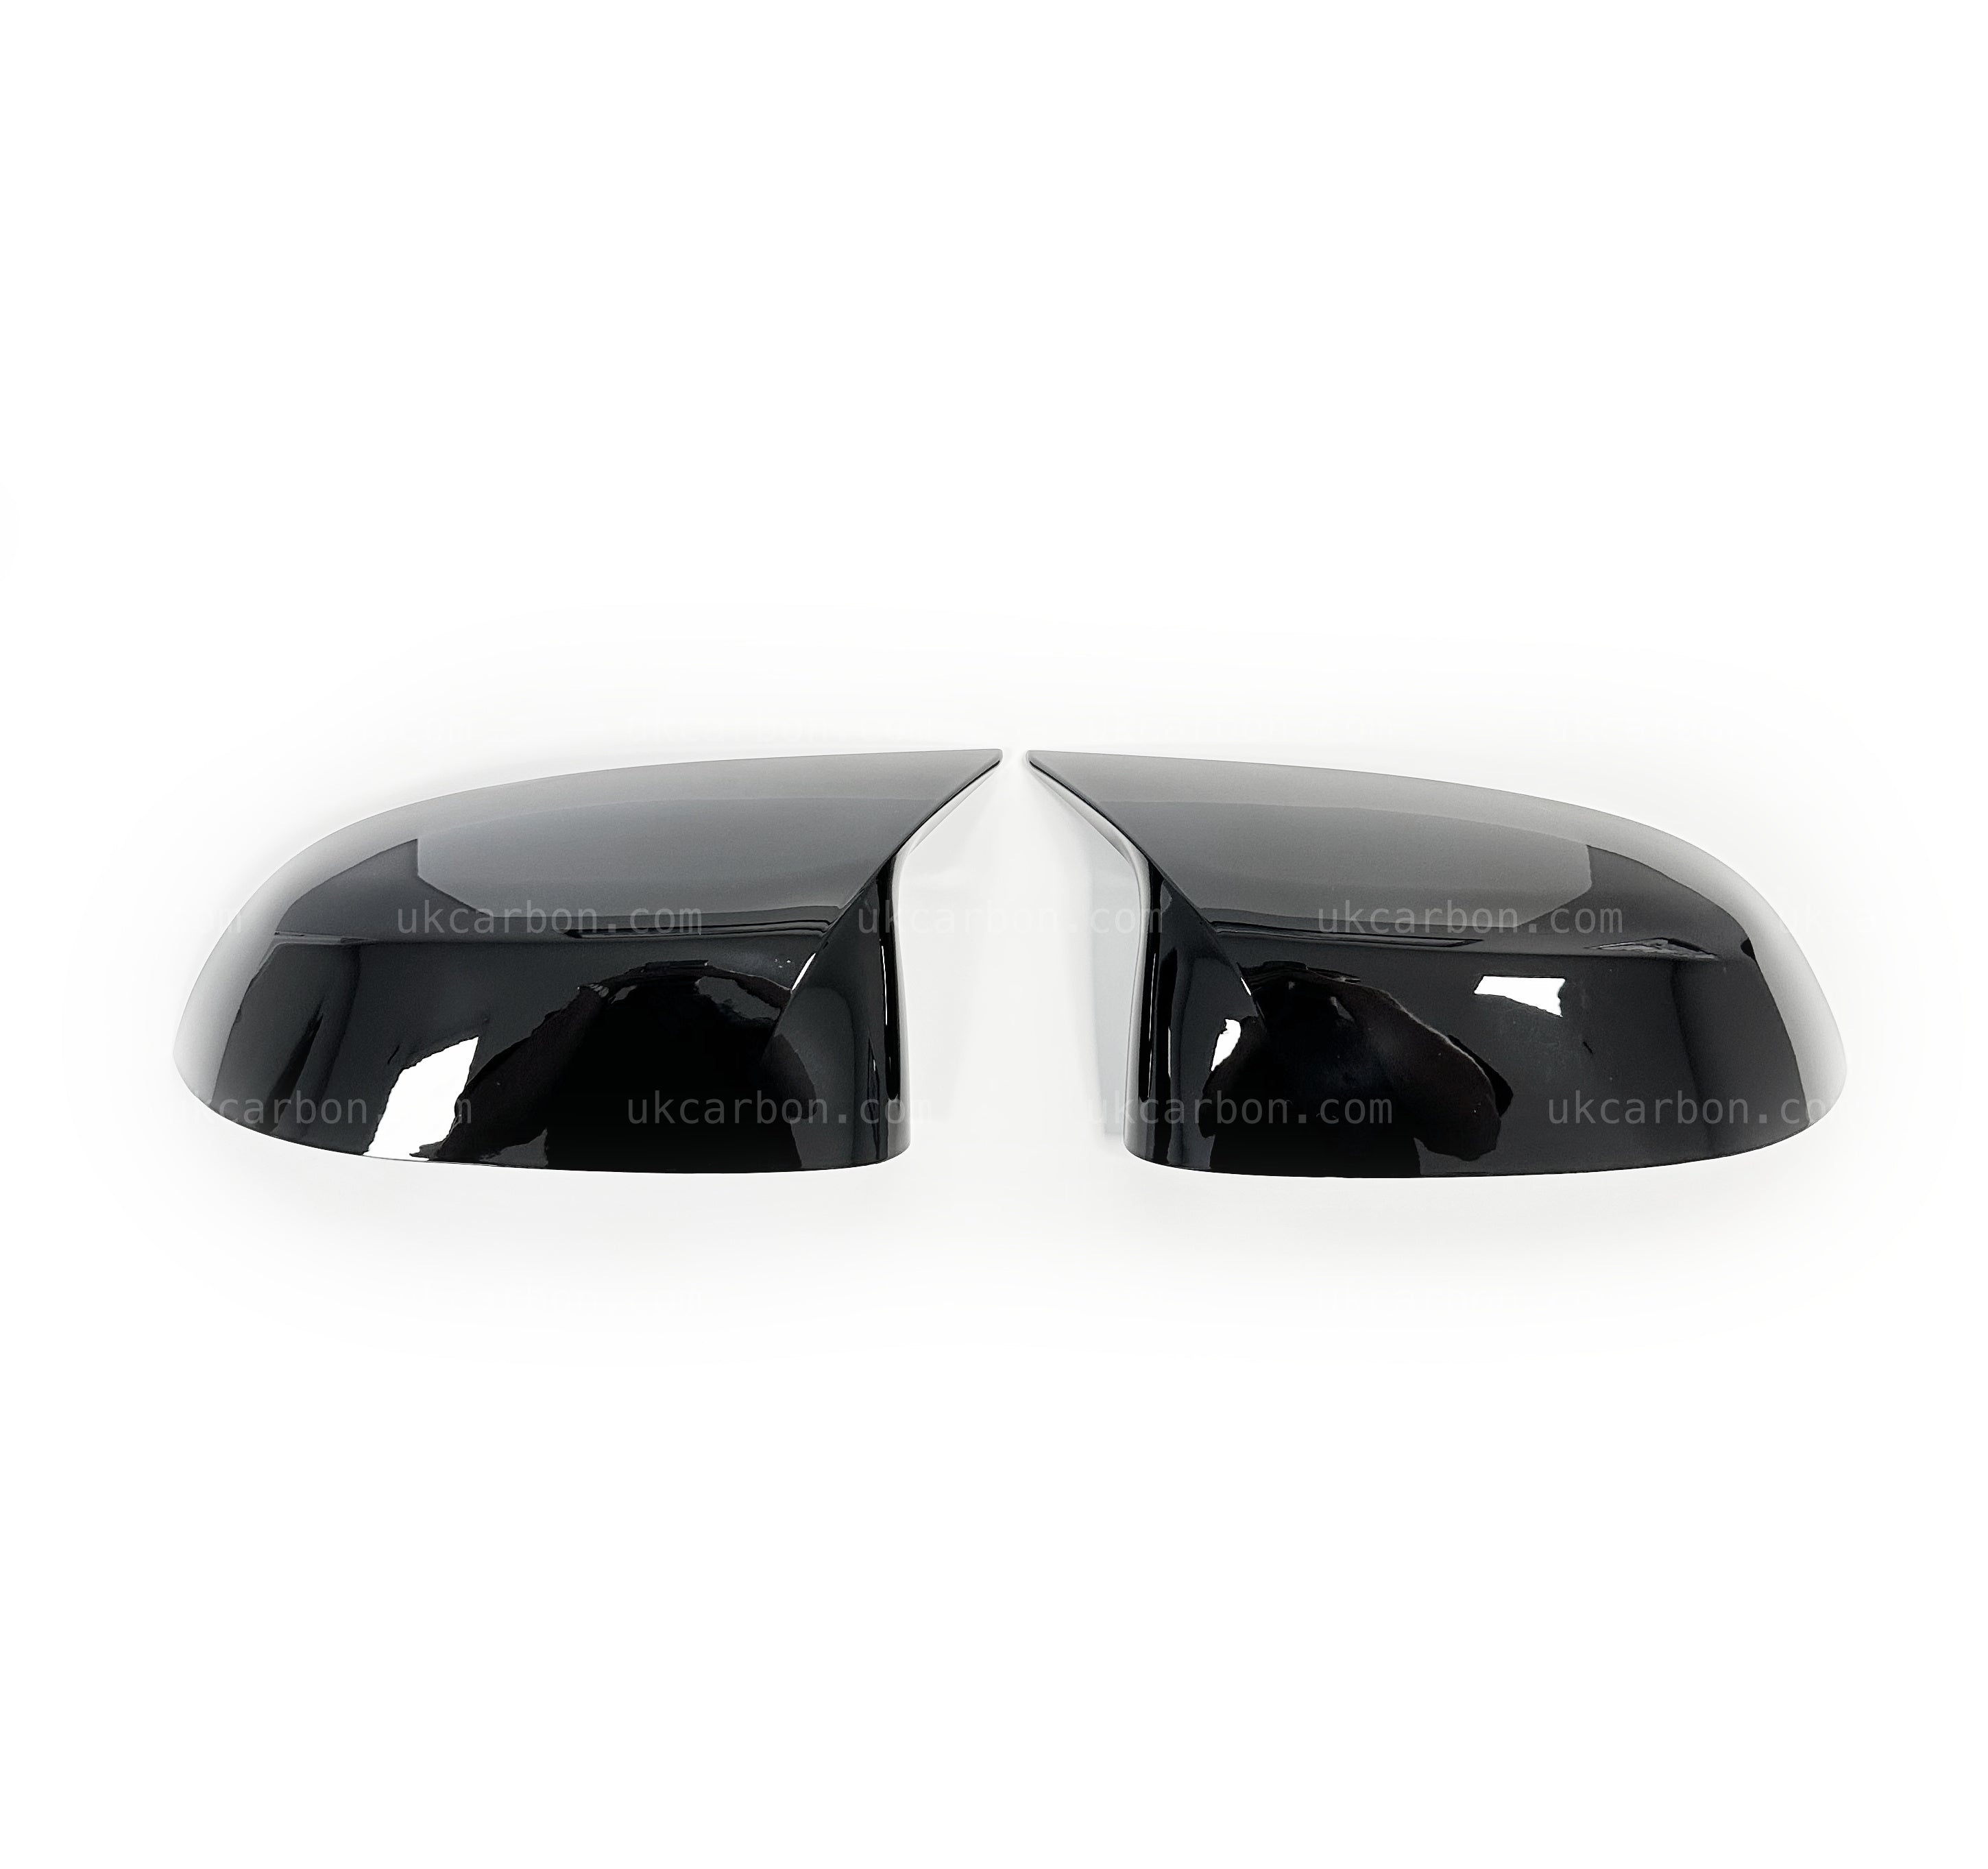 BMW X5 Gloss Black M Style Wing Mirror Cover M Performance G05 by UKCarbon